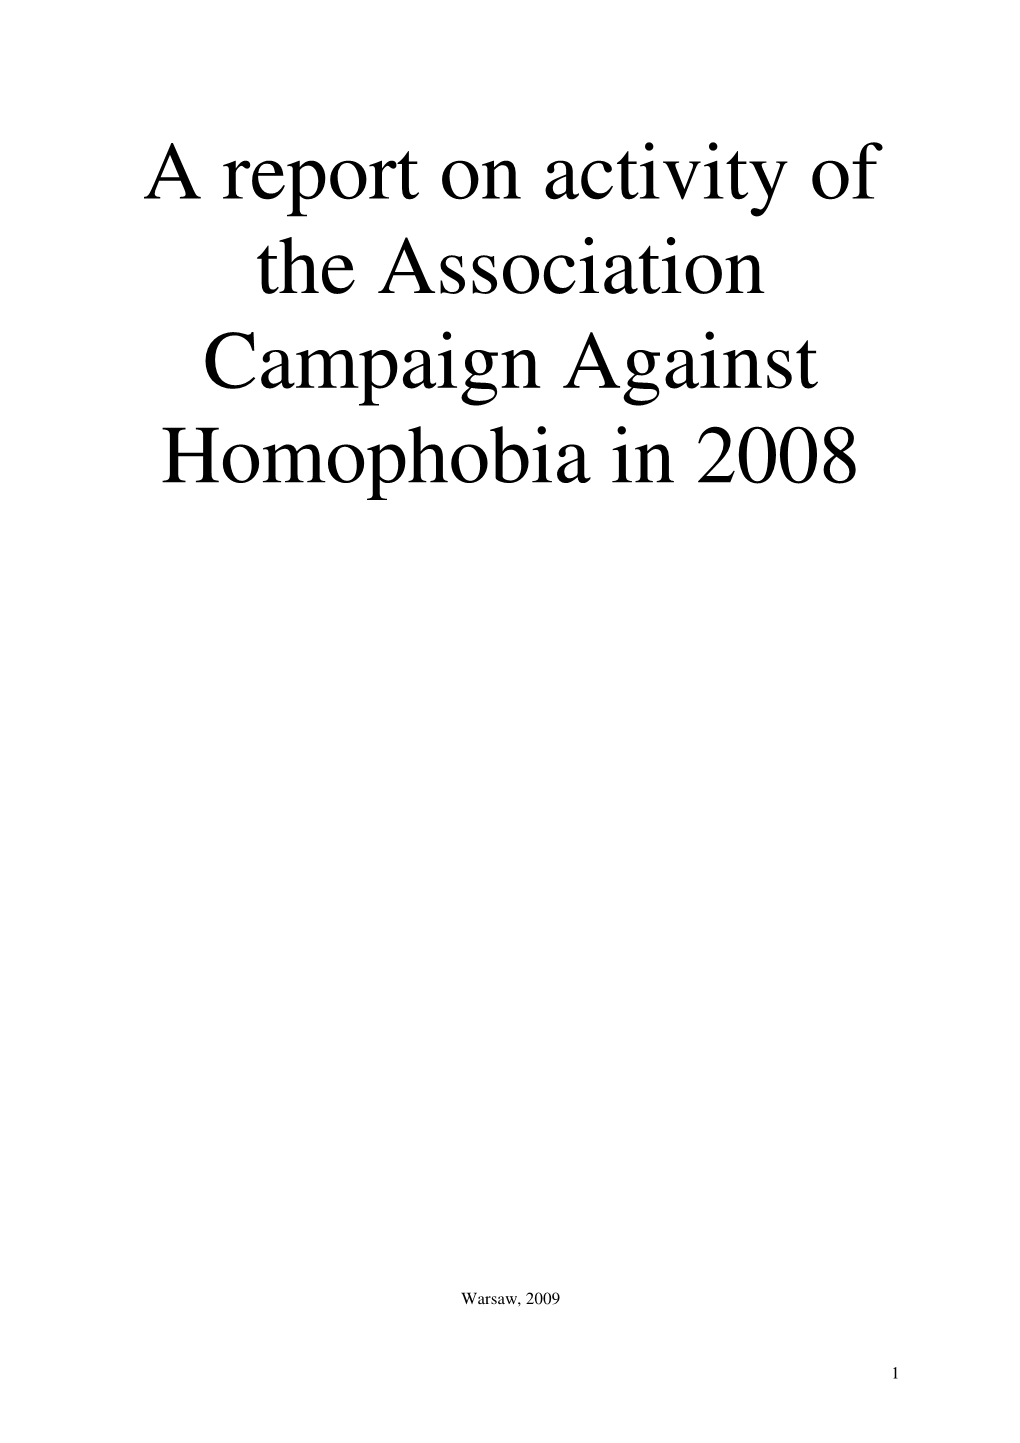 A Report on Activity of the Association Campaign Against Homophobia in 2008